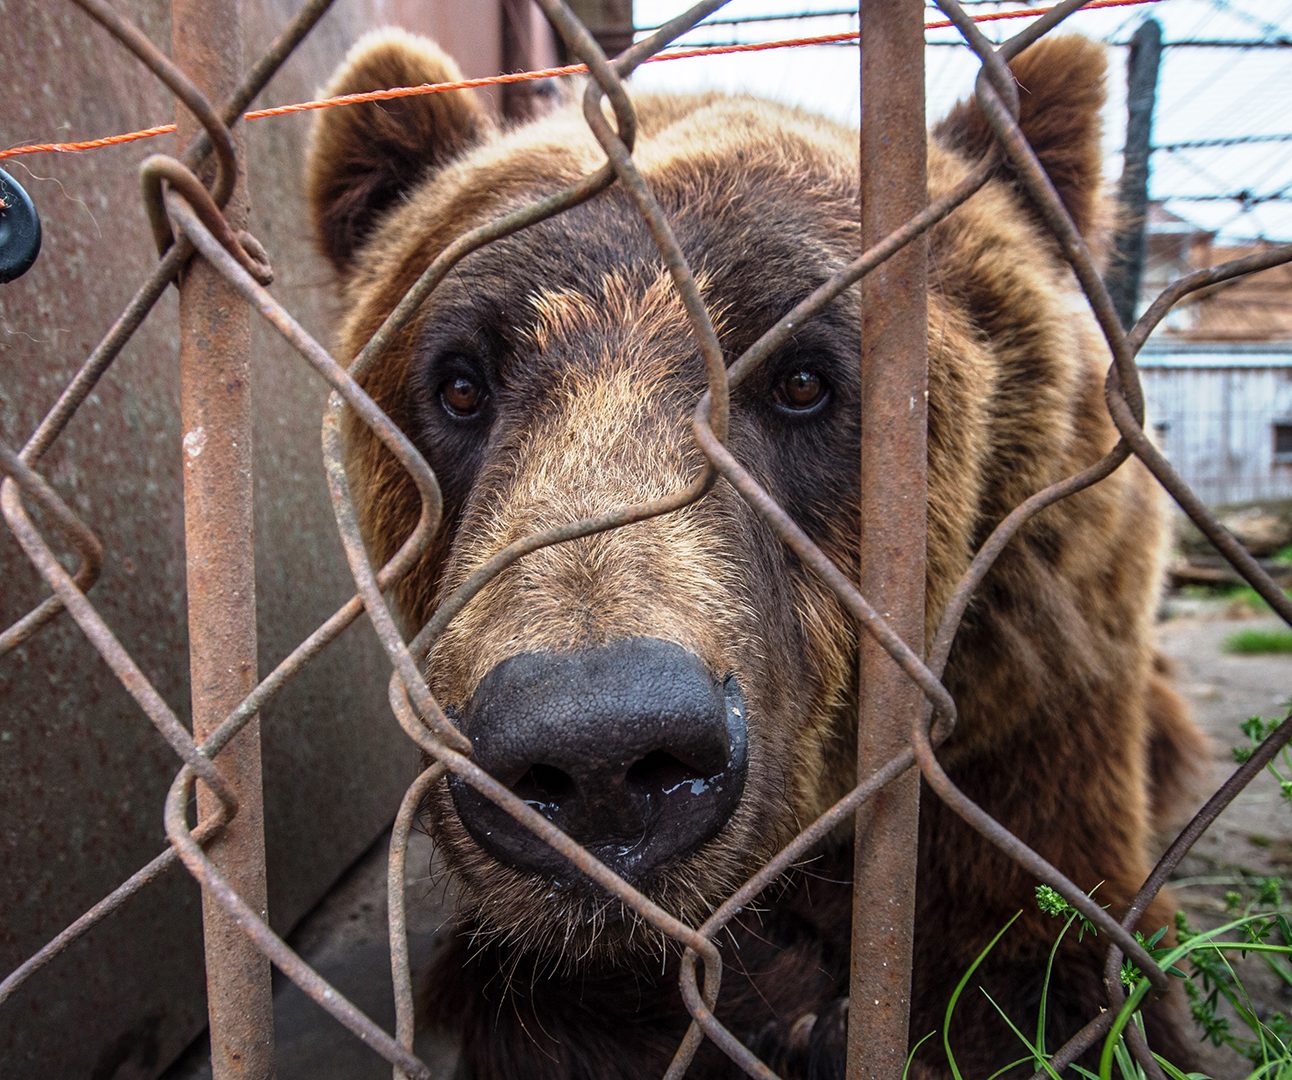 A brown bear looks through a metal wire fence at the camera